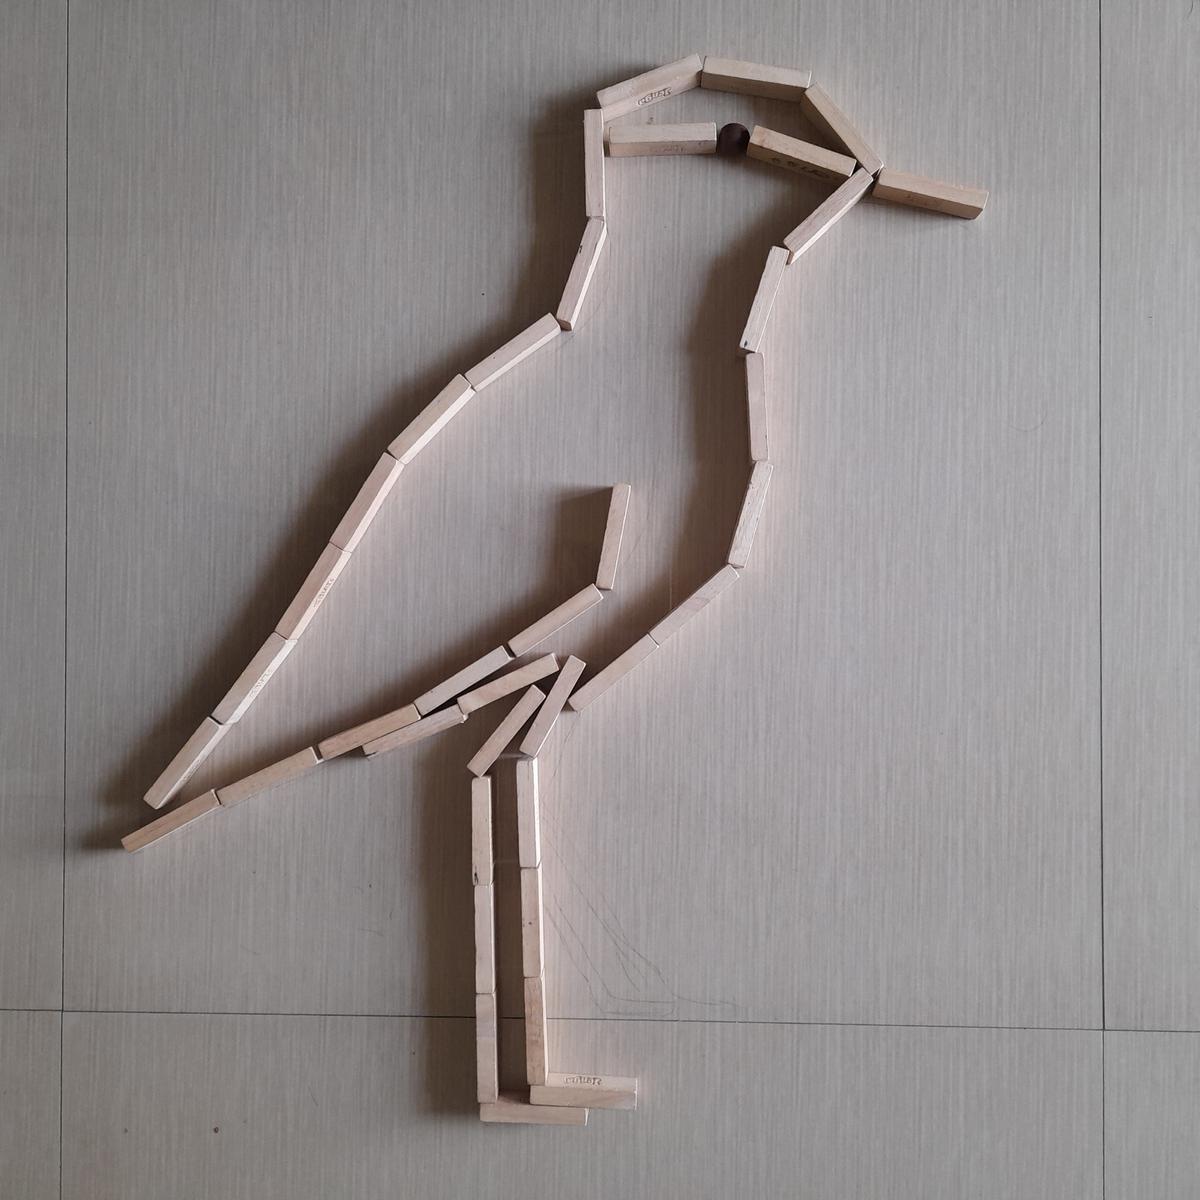 P Jeganathan’s jenga creation of the Indian Courser